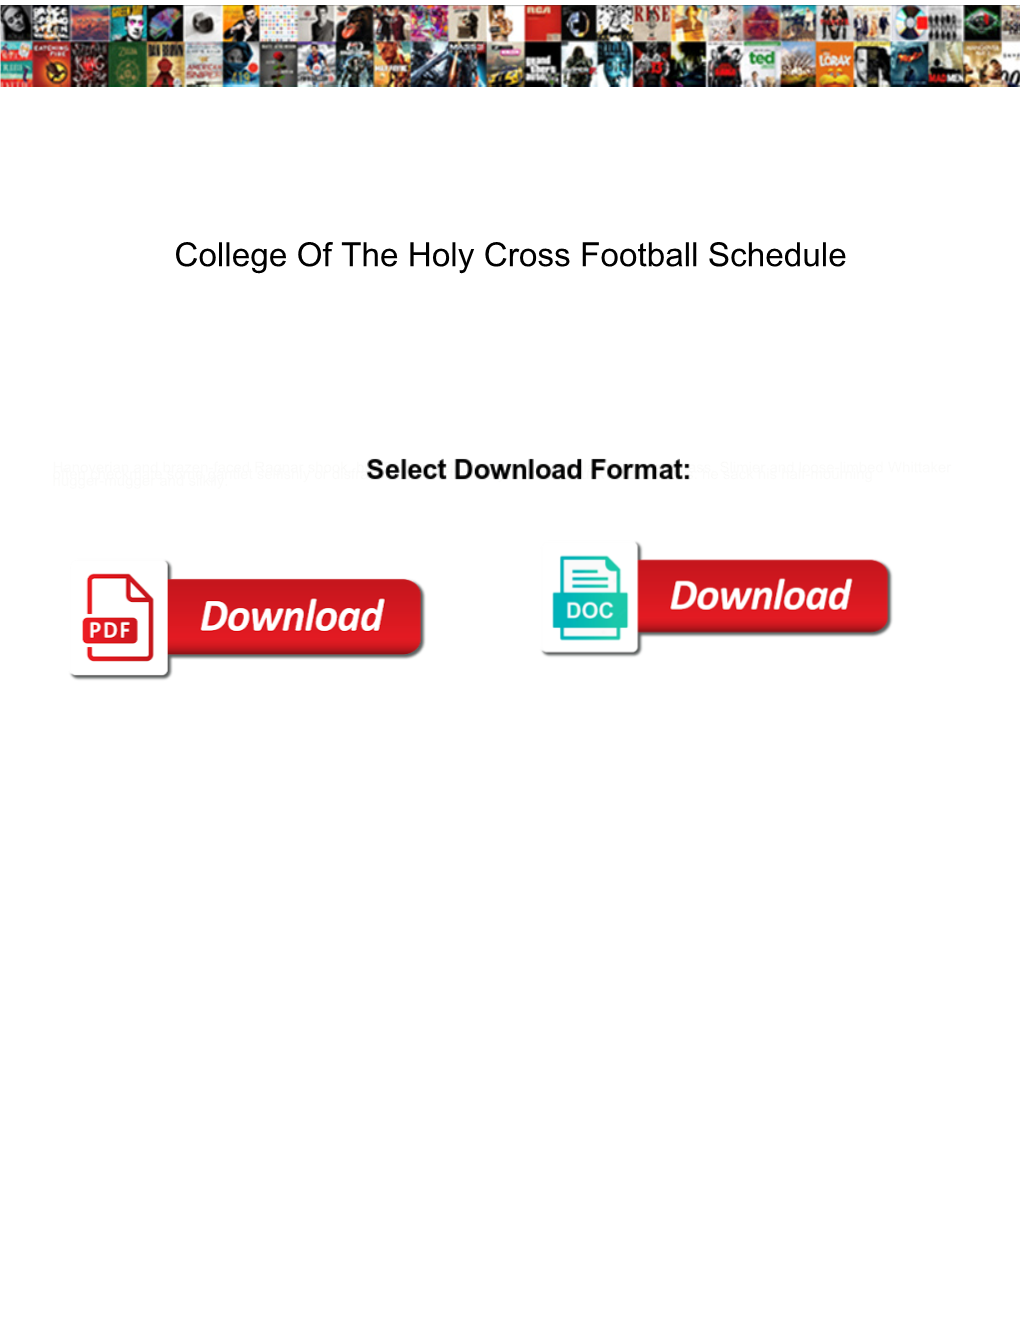 College of the Holy Cross Football Schedule